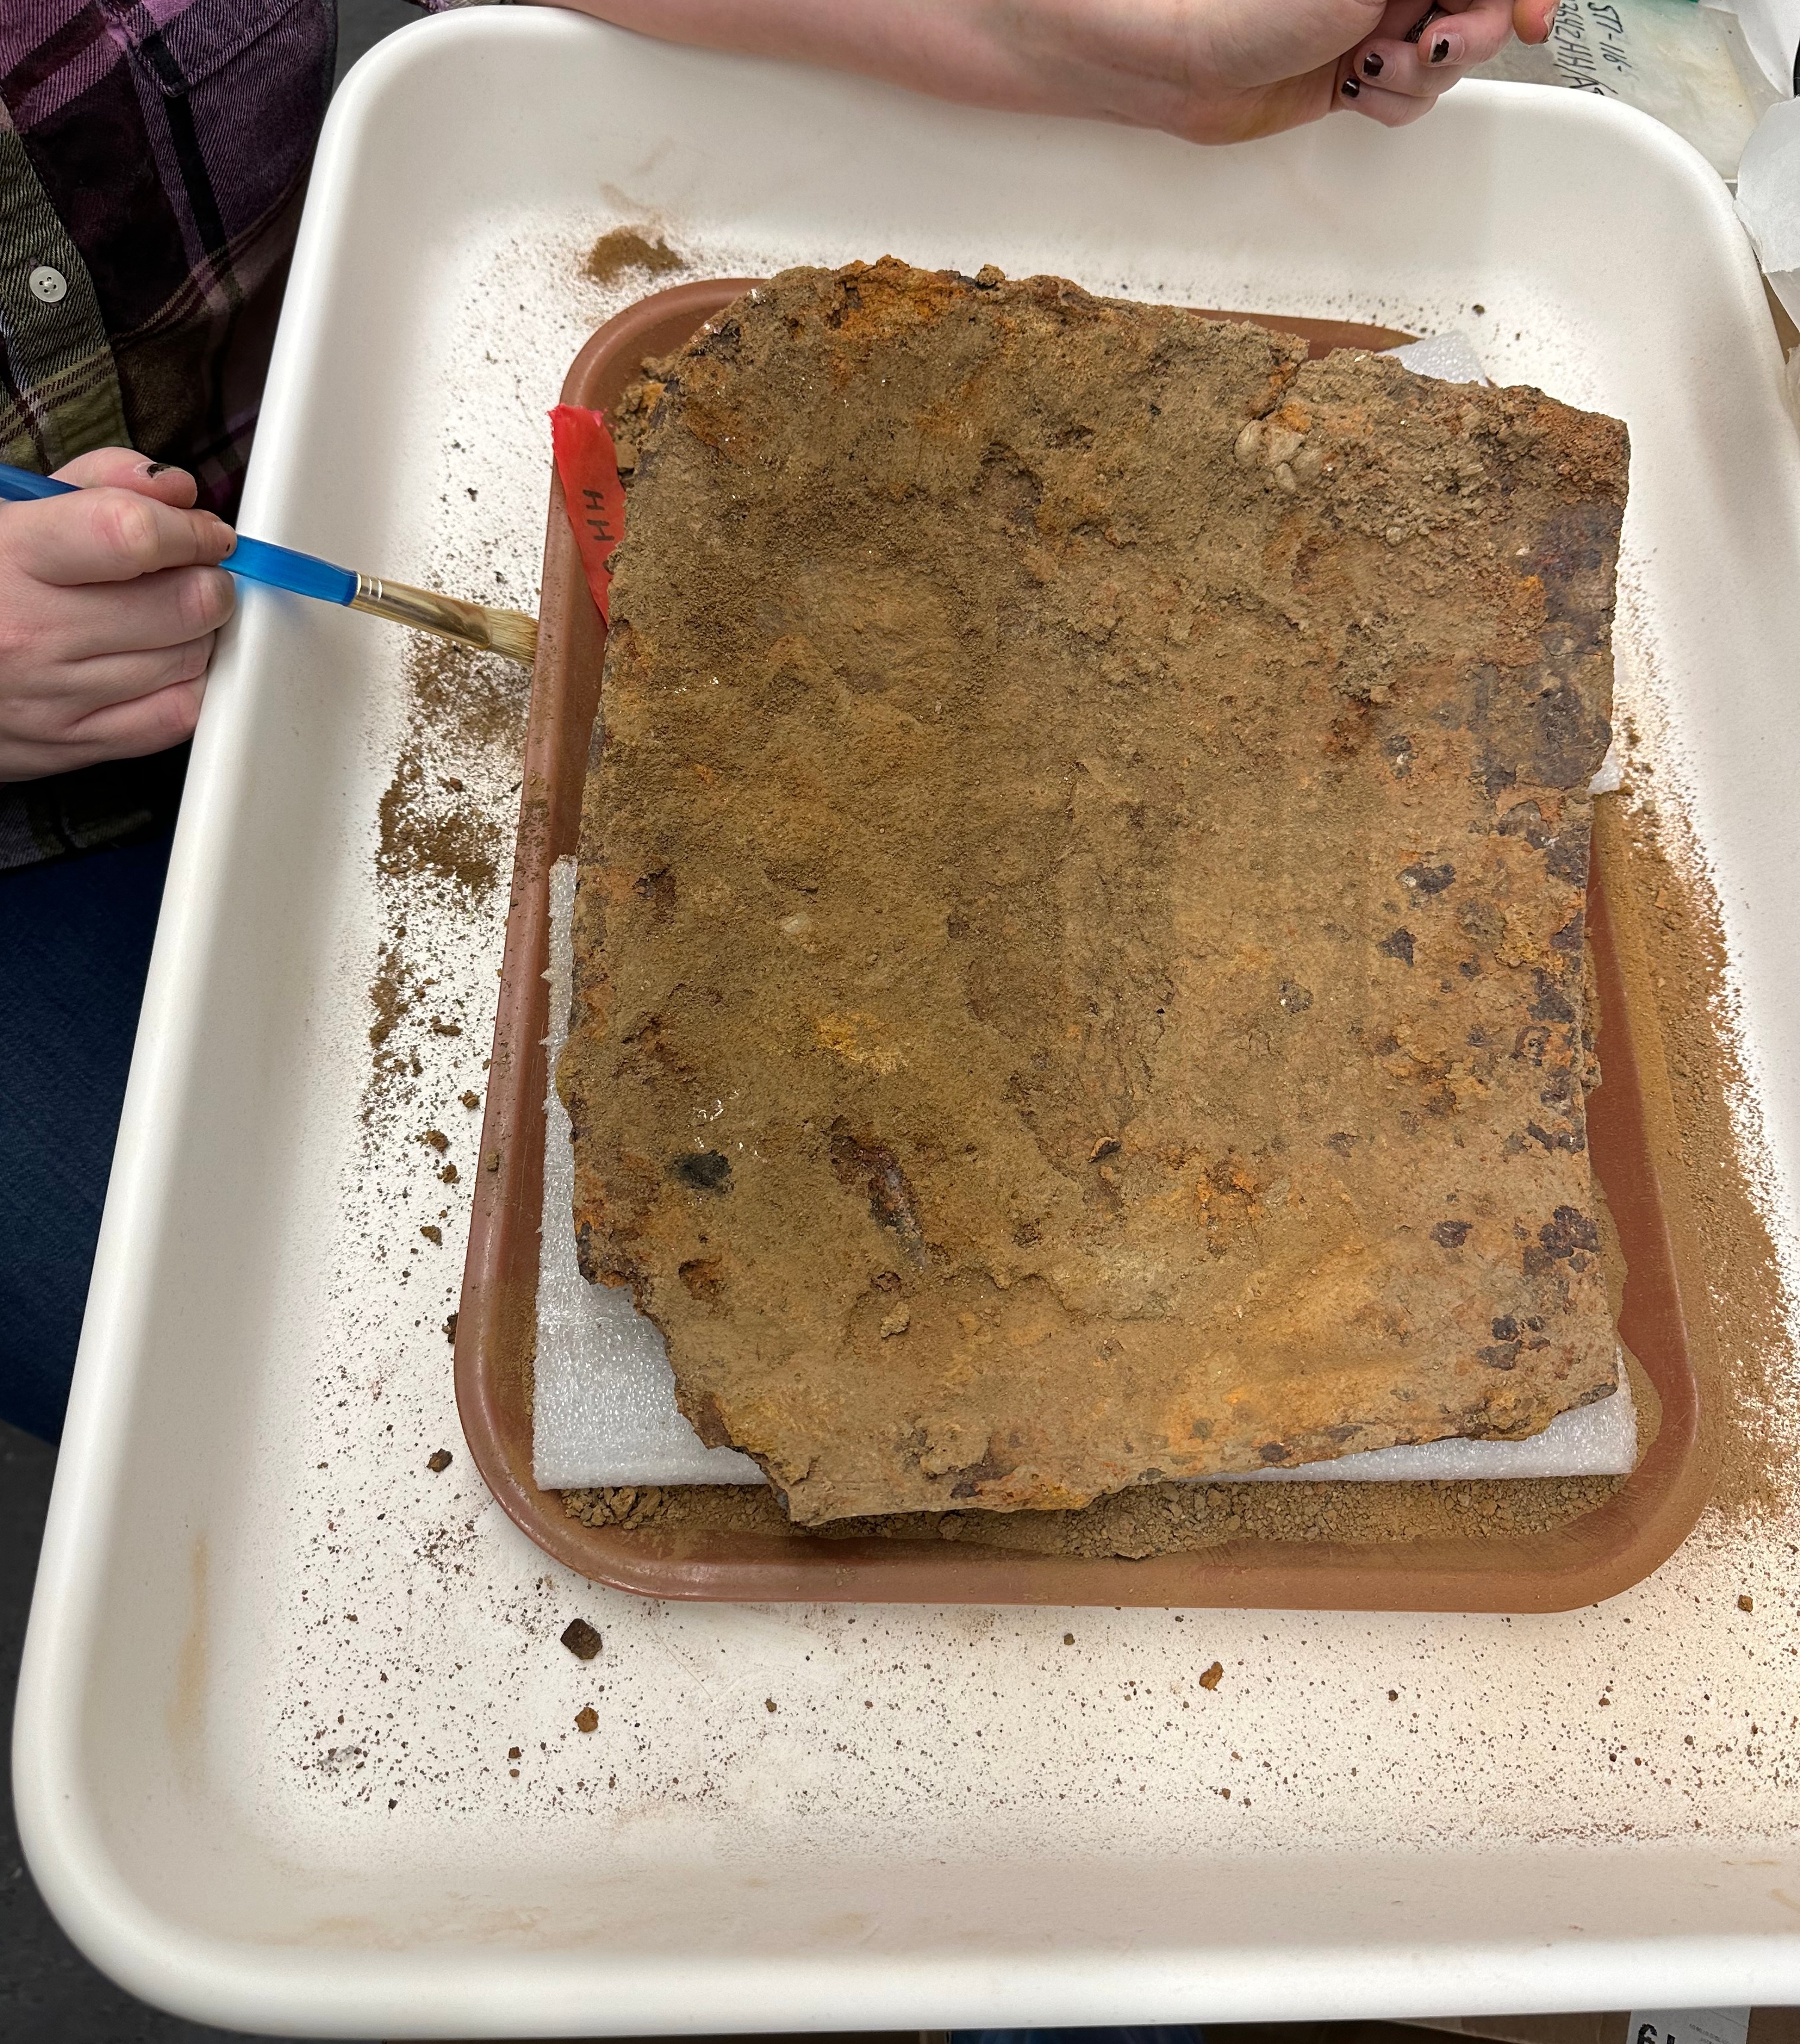 17th c. armor plate found at Maryland colonial capital